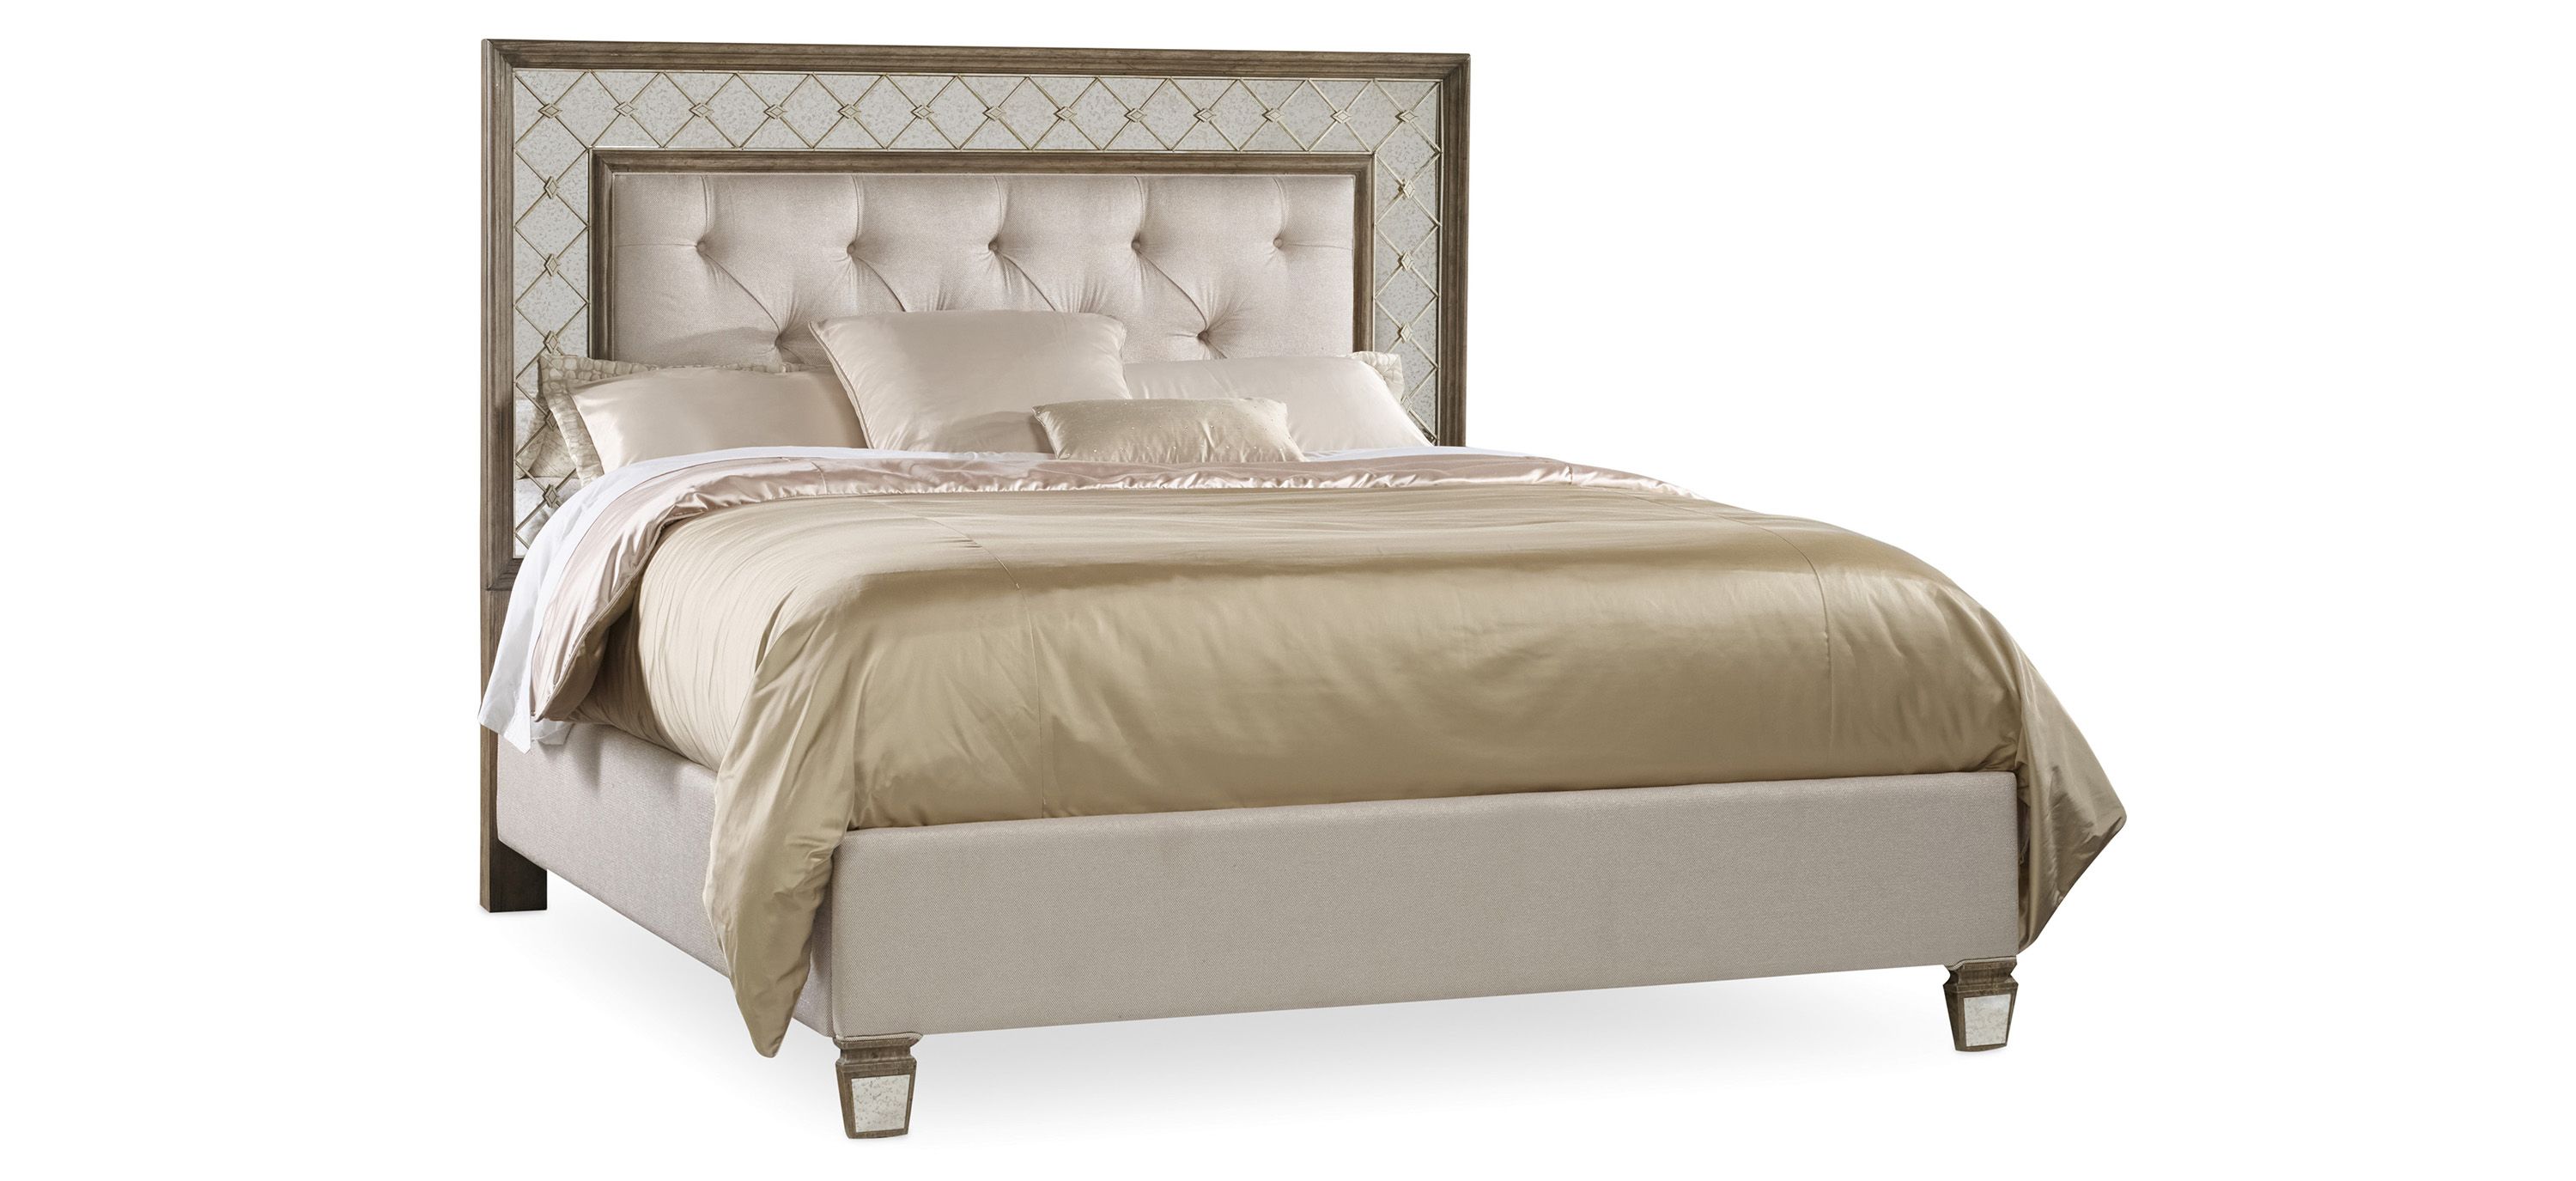 Sanctuary Mirrored Upholstered Bed